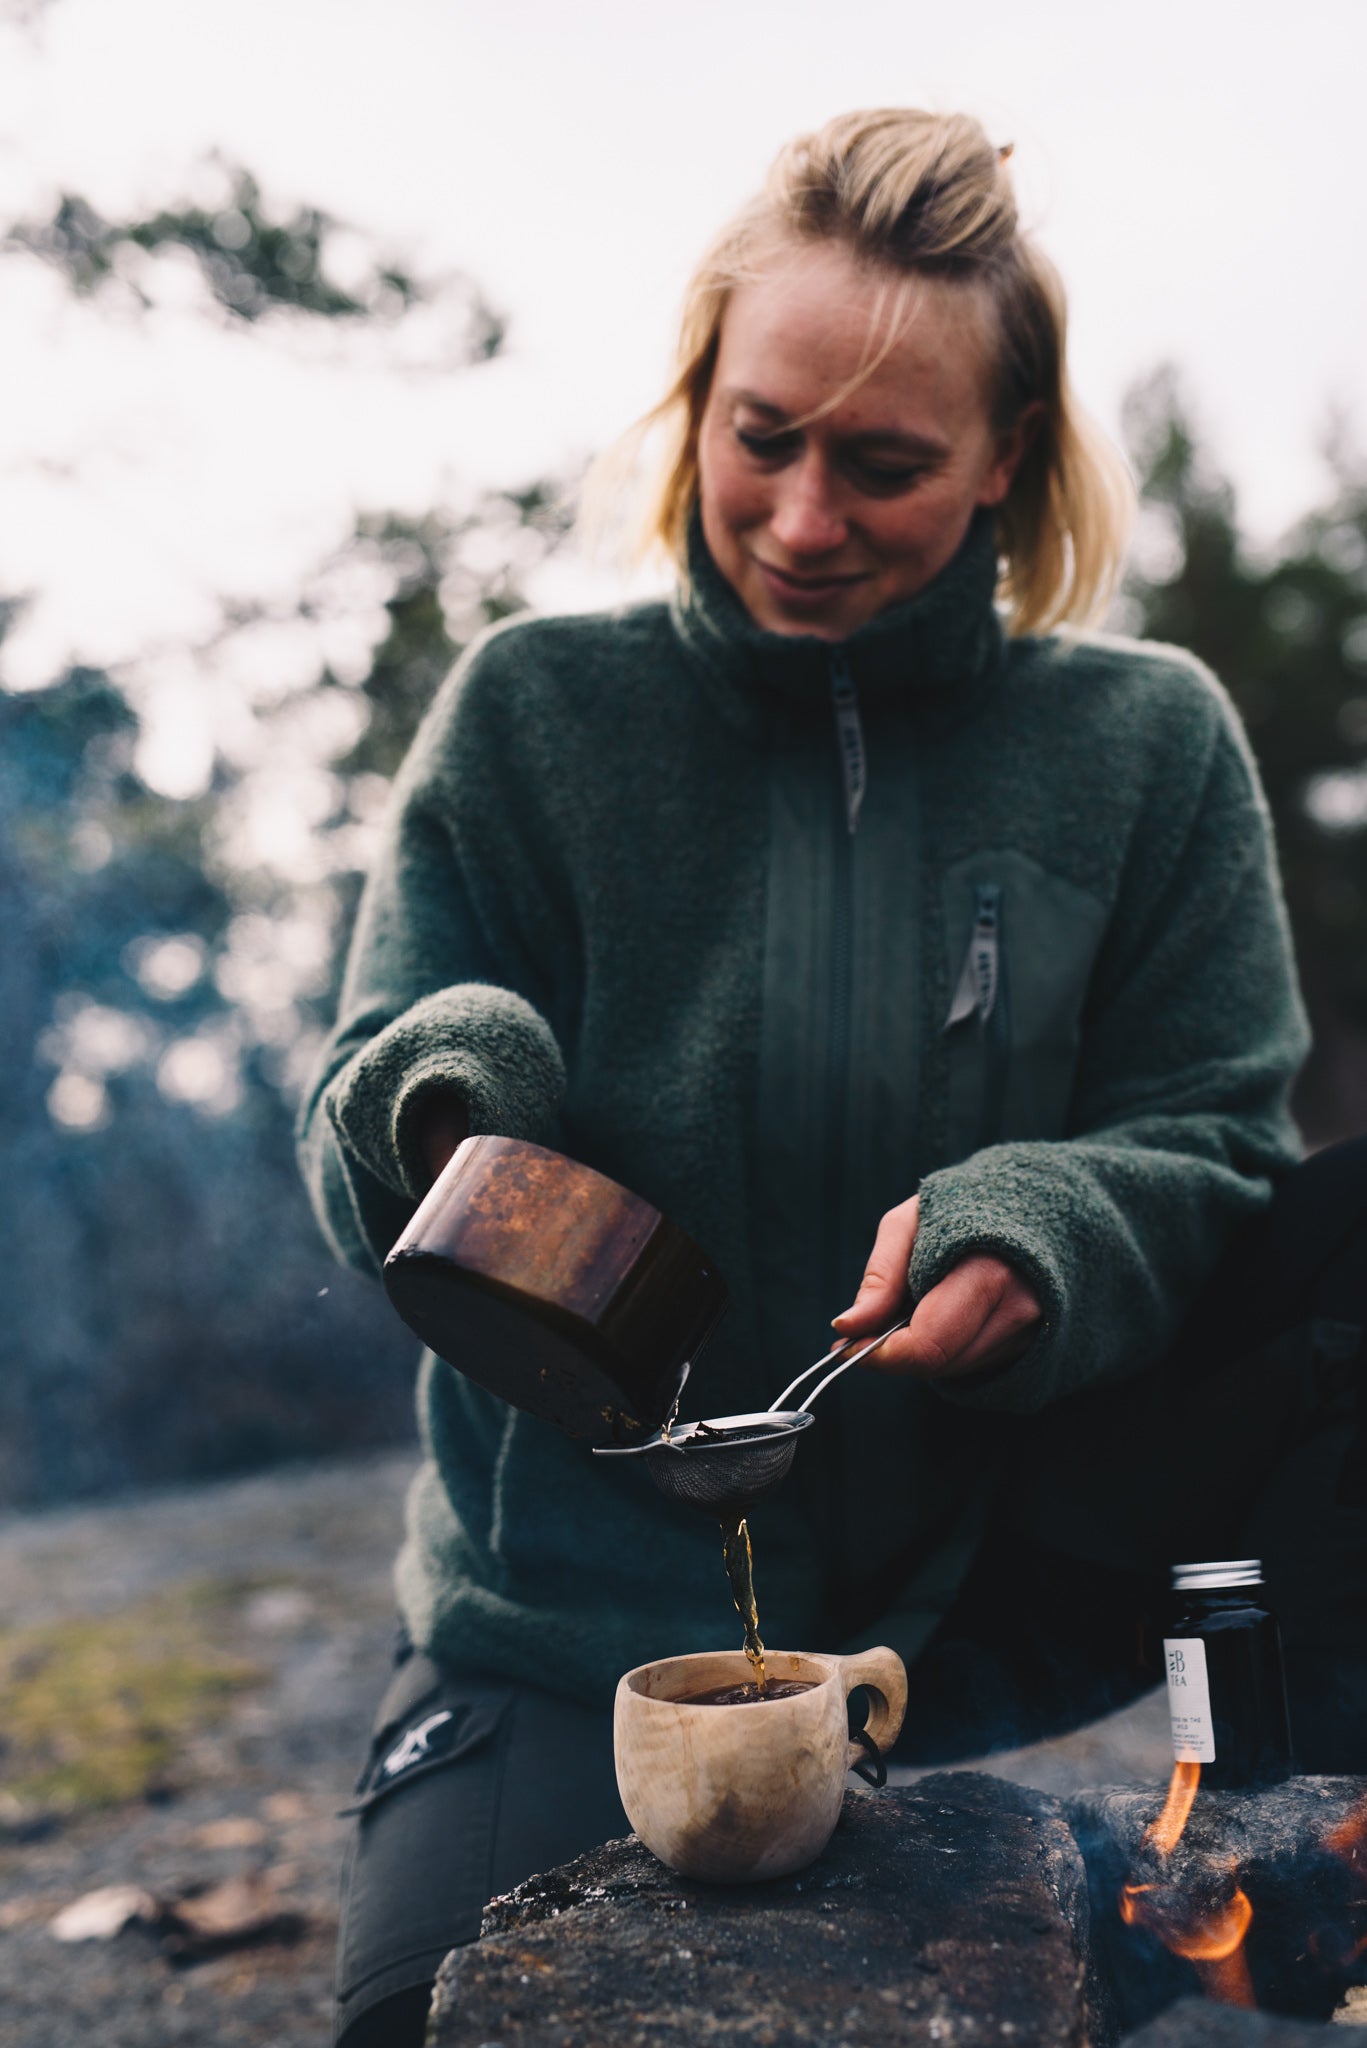 Afternoon Tea in the Wild with the founder of We B Tea – Astrid Wild